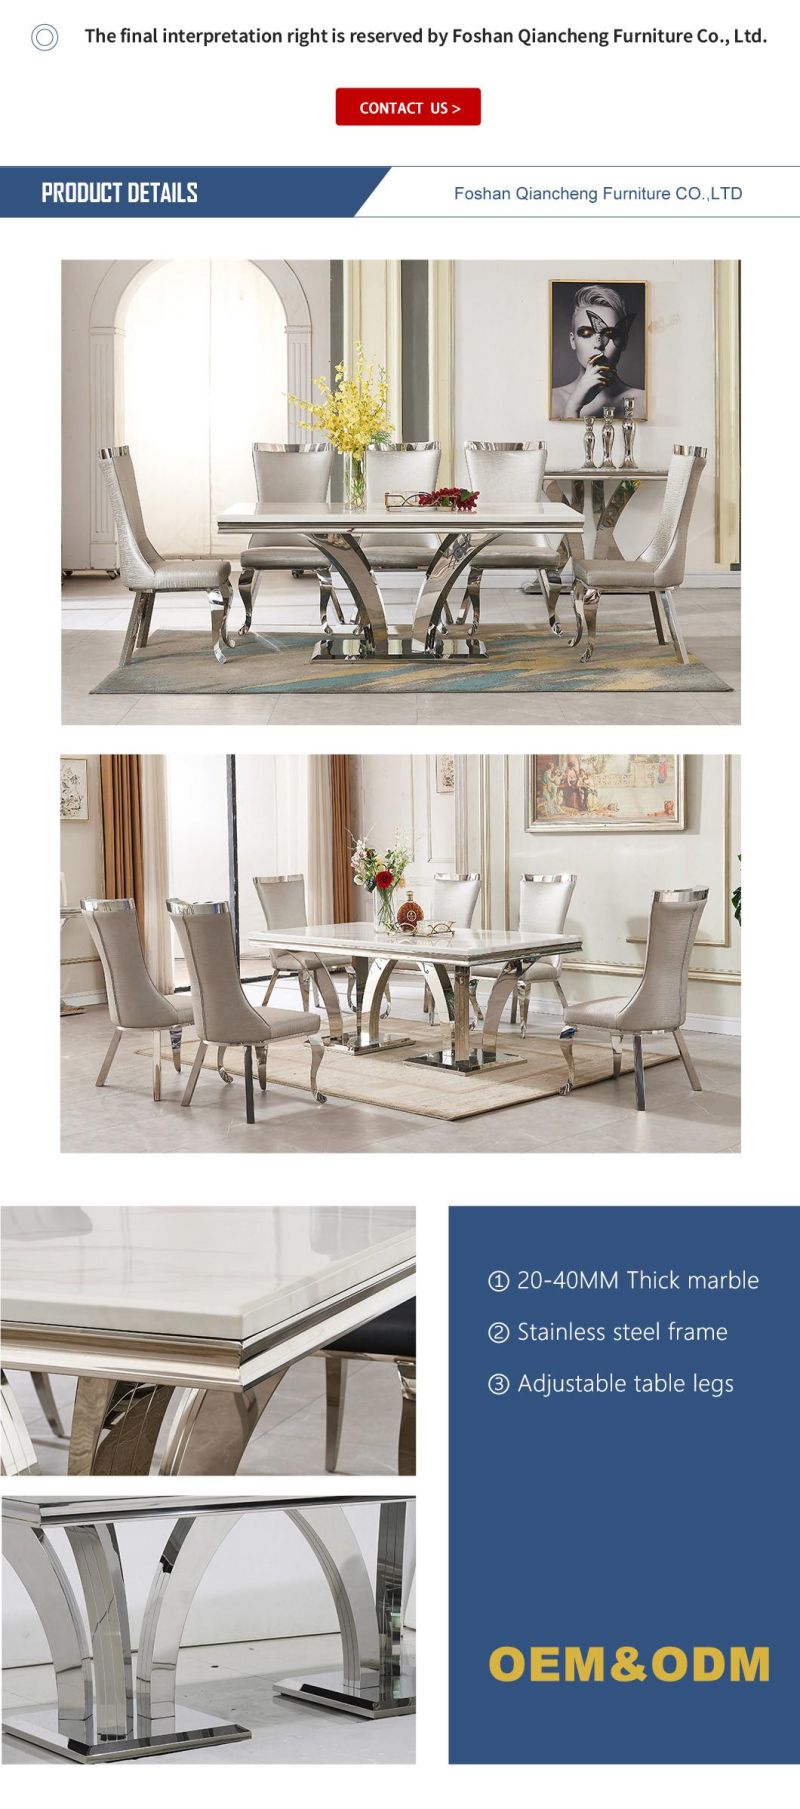 Dining Room Furniture Table Set Marble Table with 8chairs